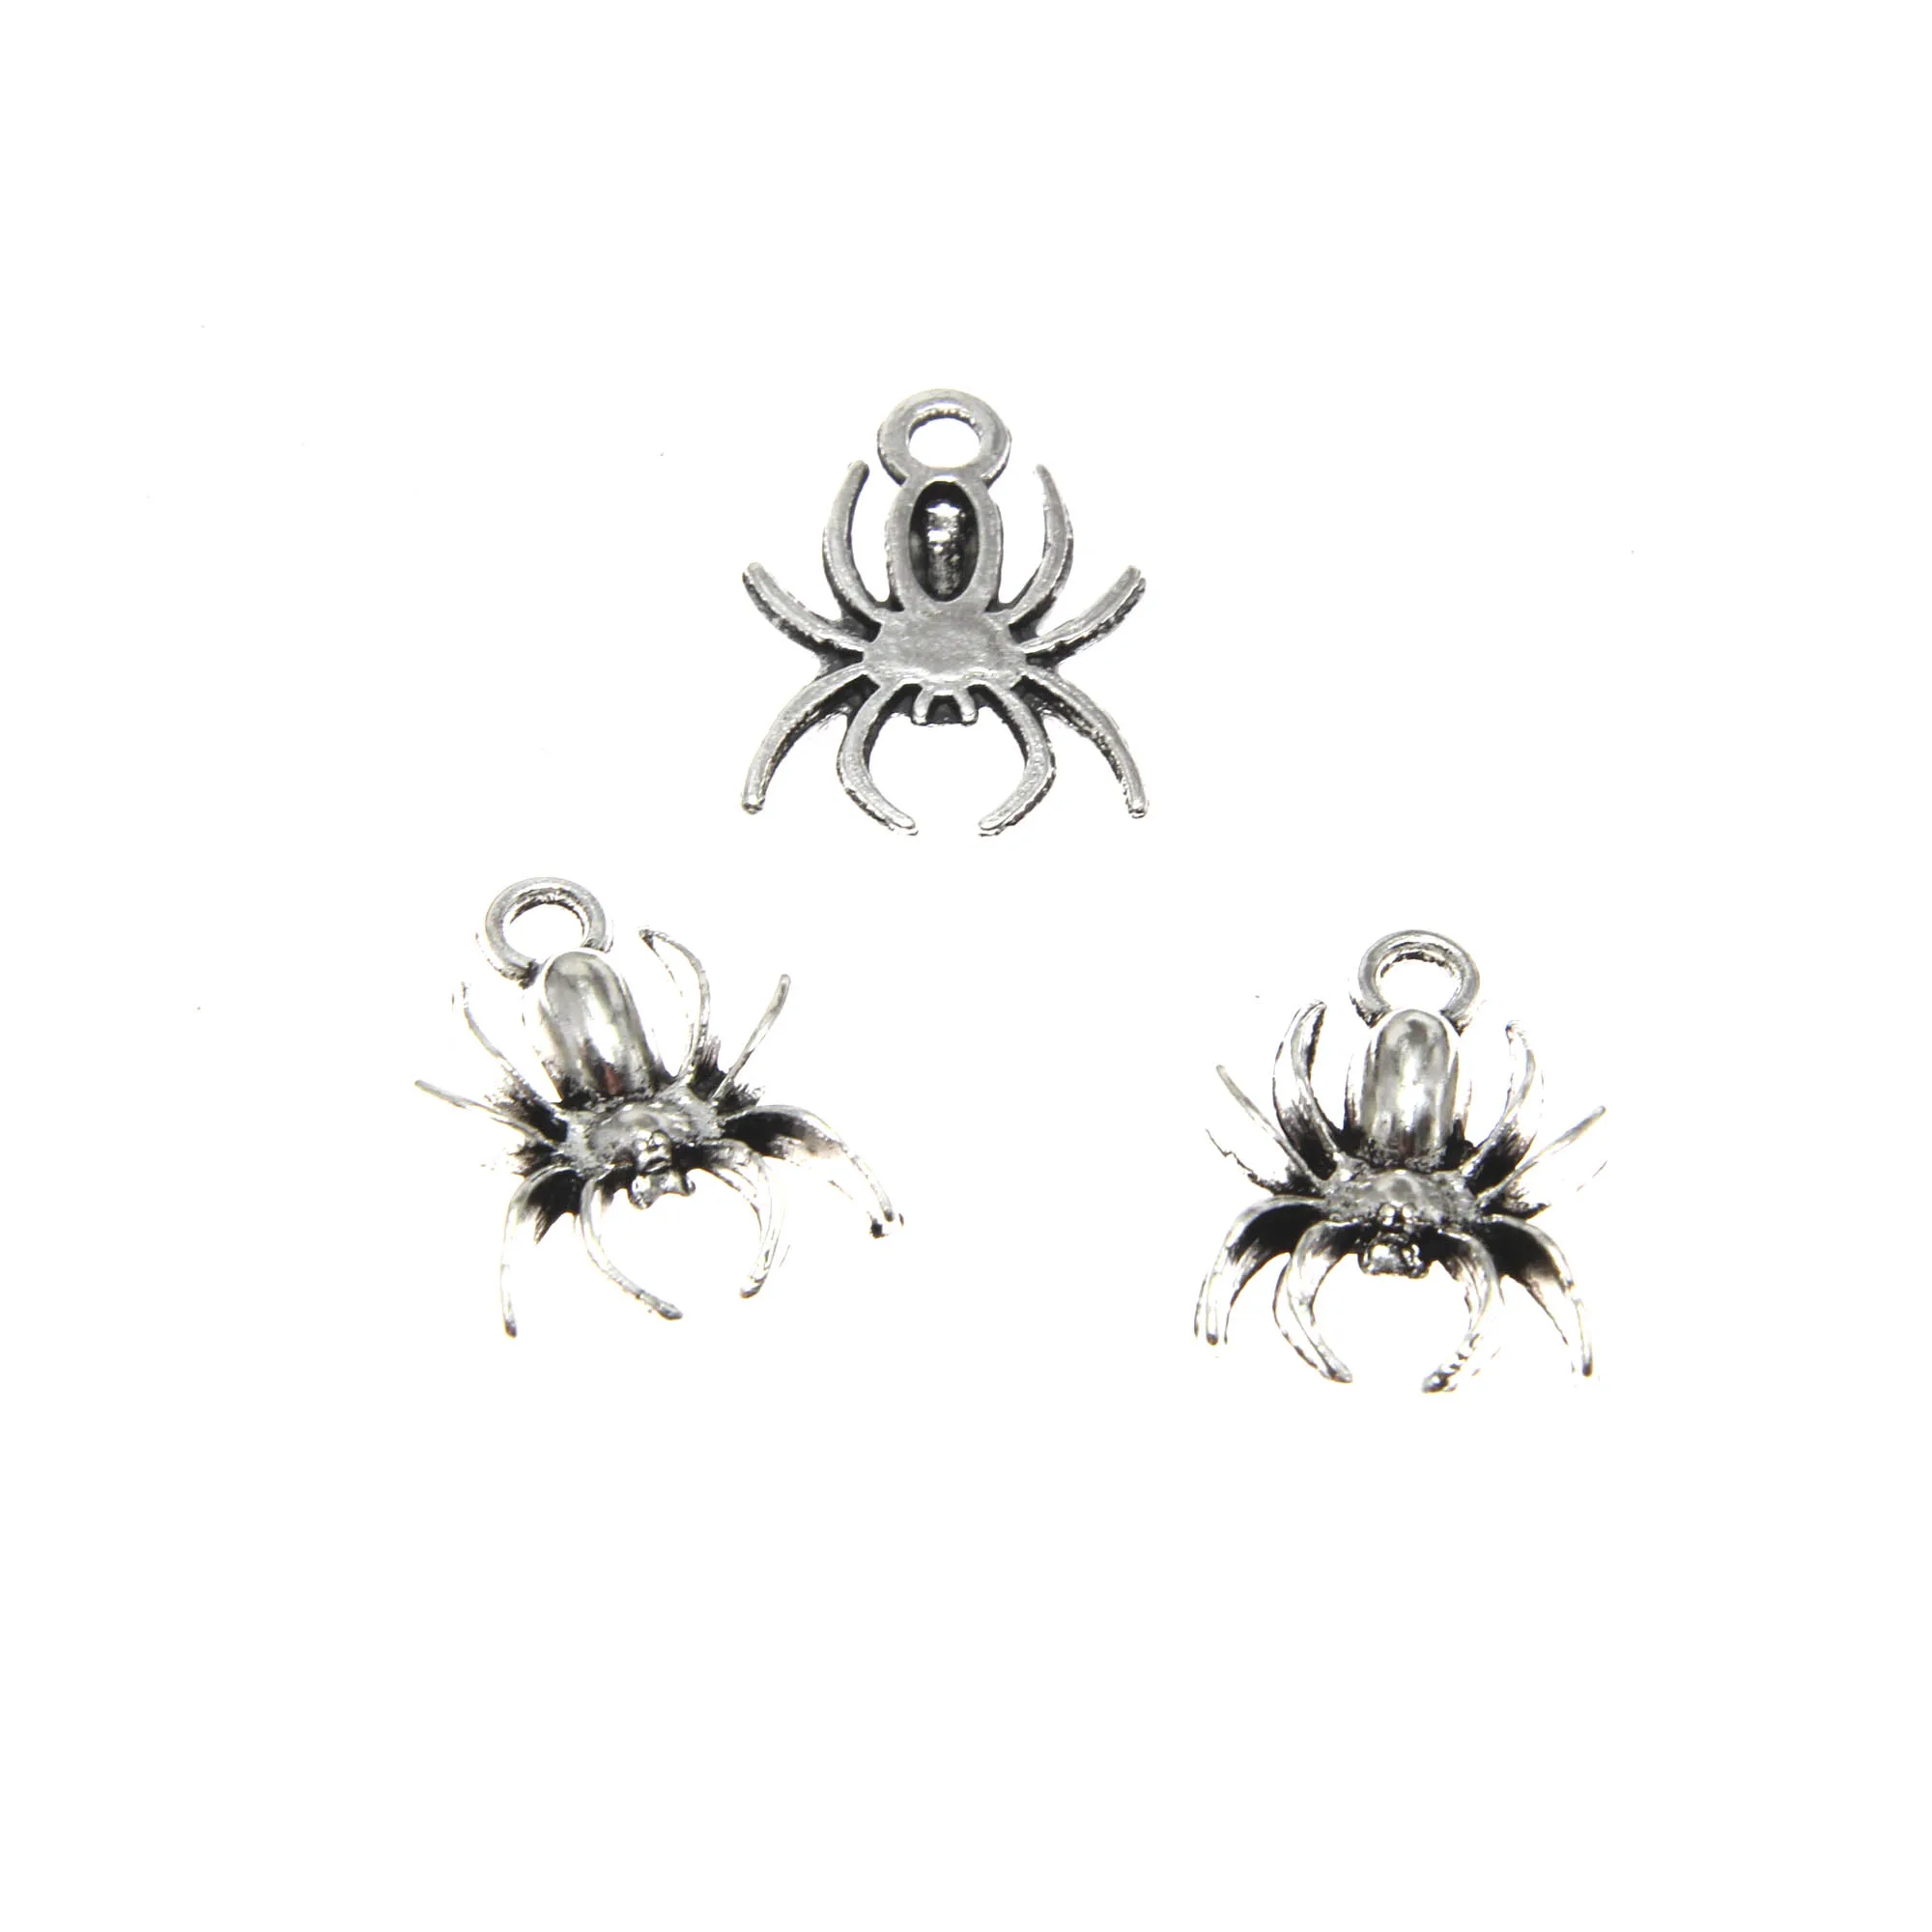 

30pcs spider charms Antique silver tone spider insects charm pendant DIY jewelry findings 14x18mm